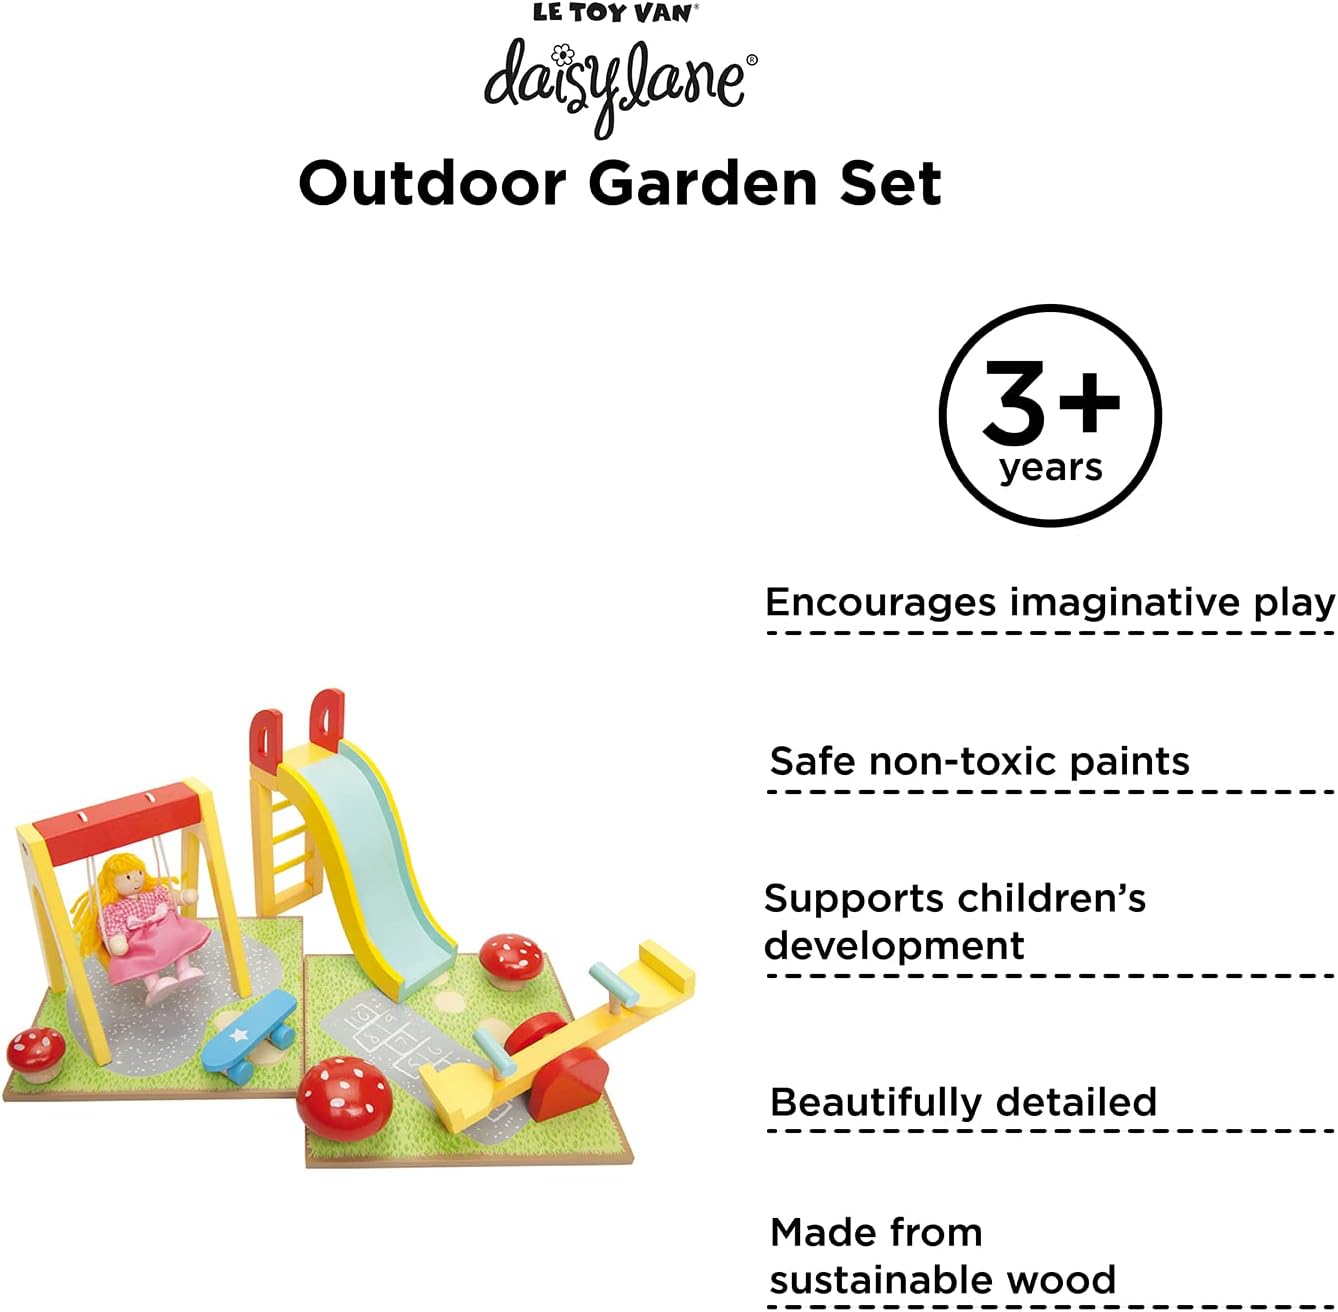 Doll Outdoor Playset